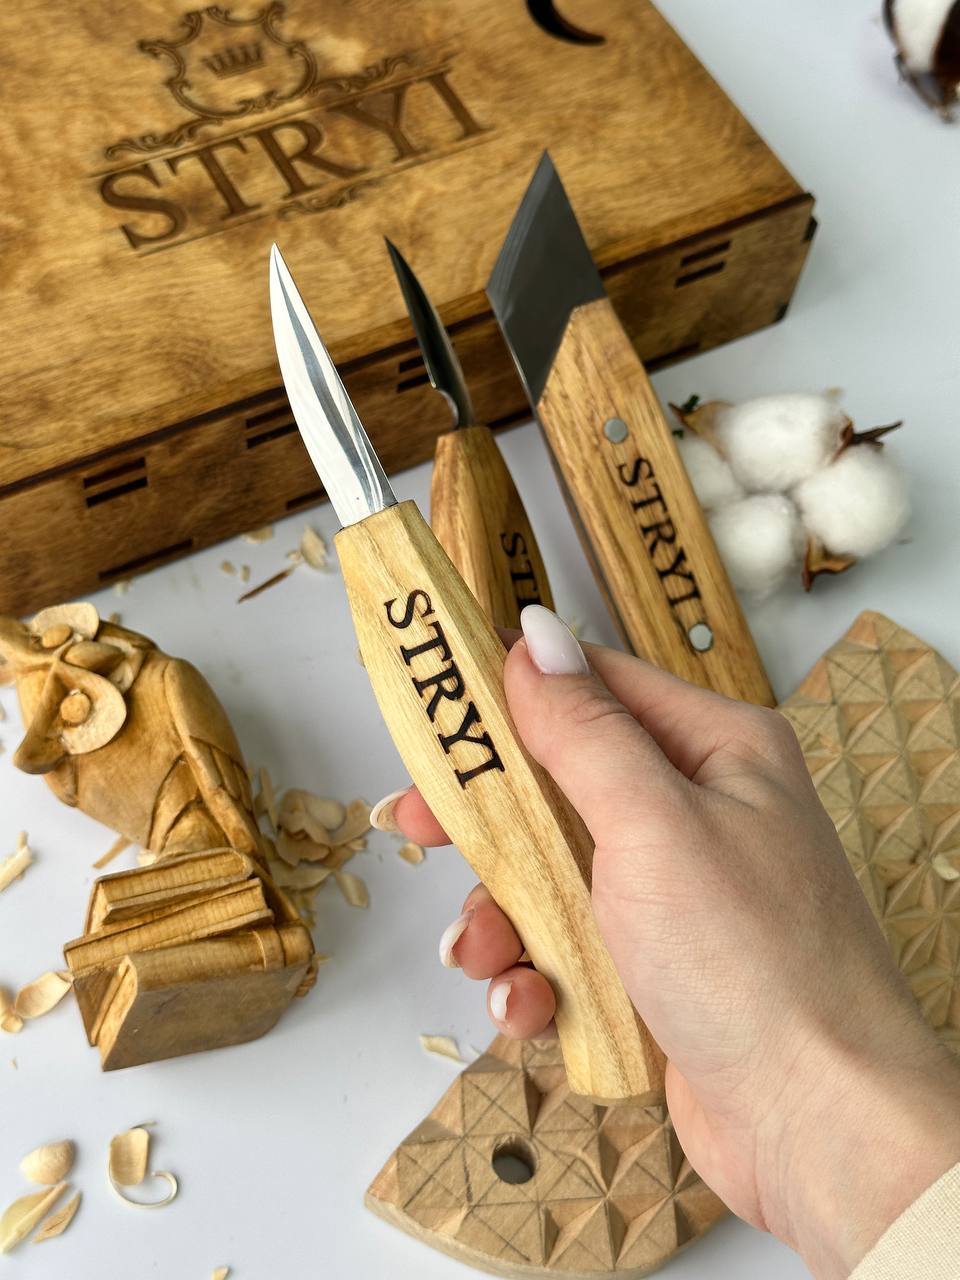 Wood carving knives set of 3pcs STRYI Profi in wooden storage case